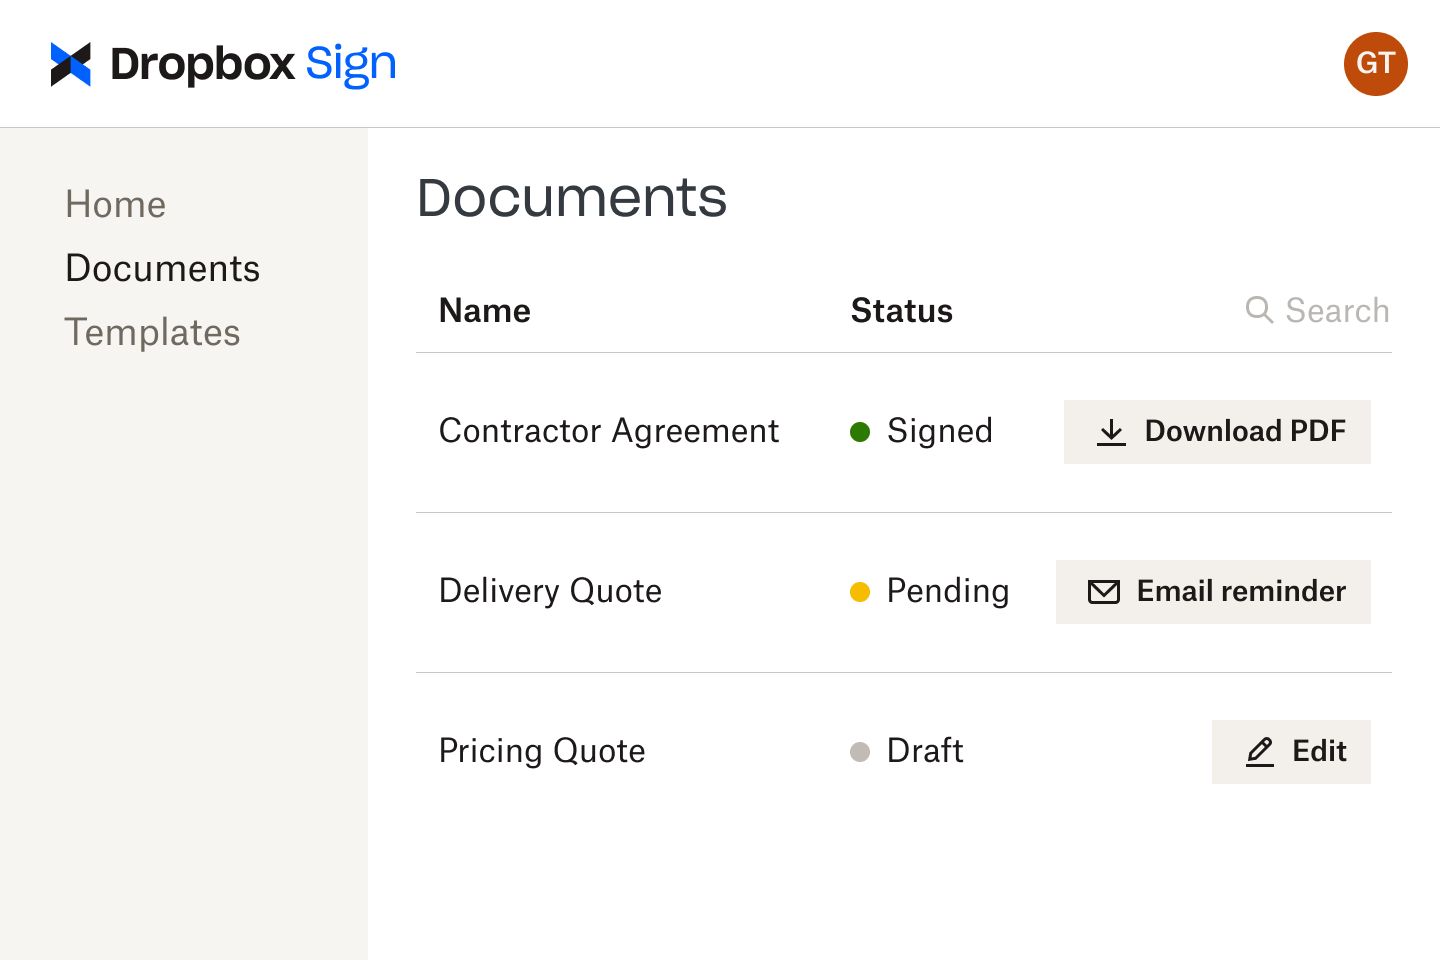 Documents in Dropbox Sign interface at various stages of review